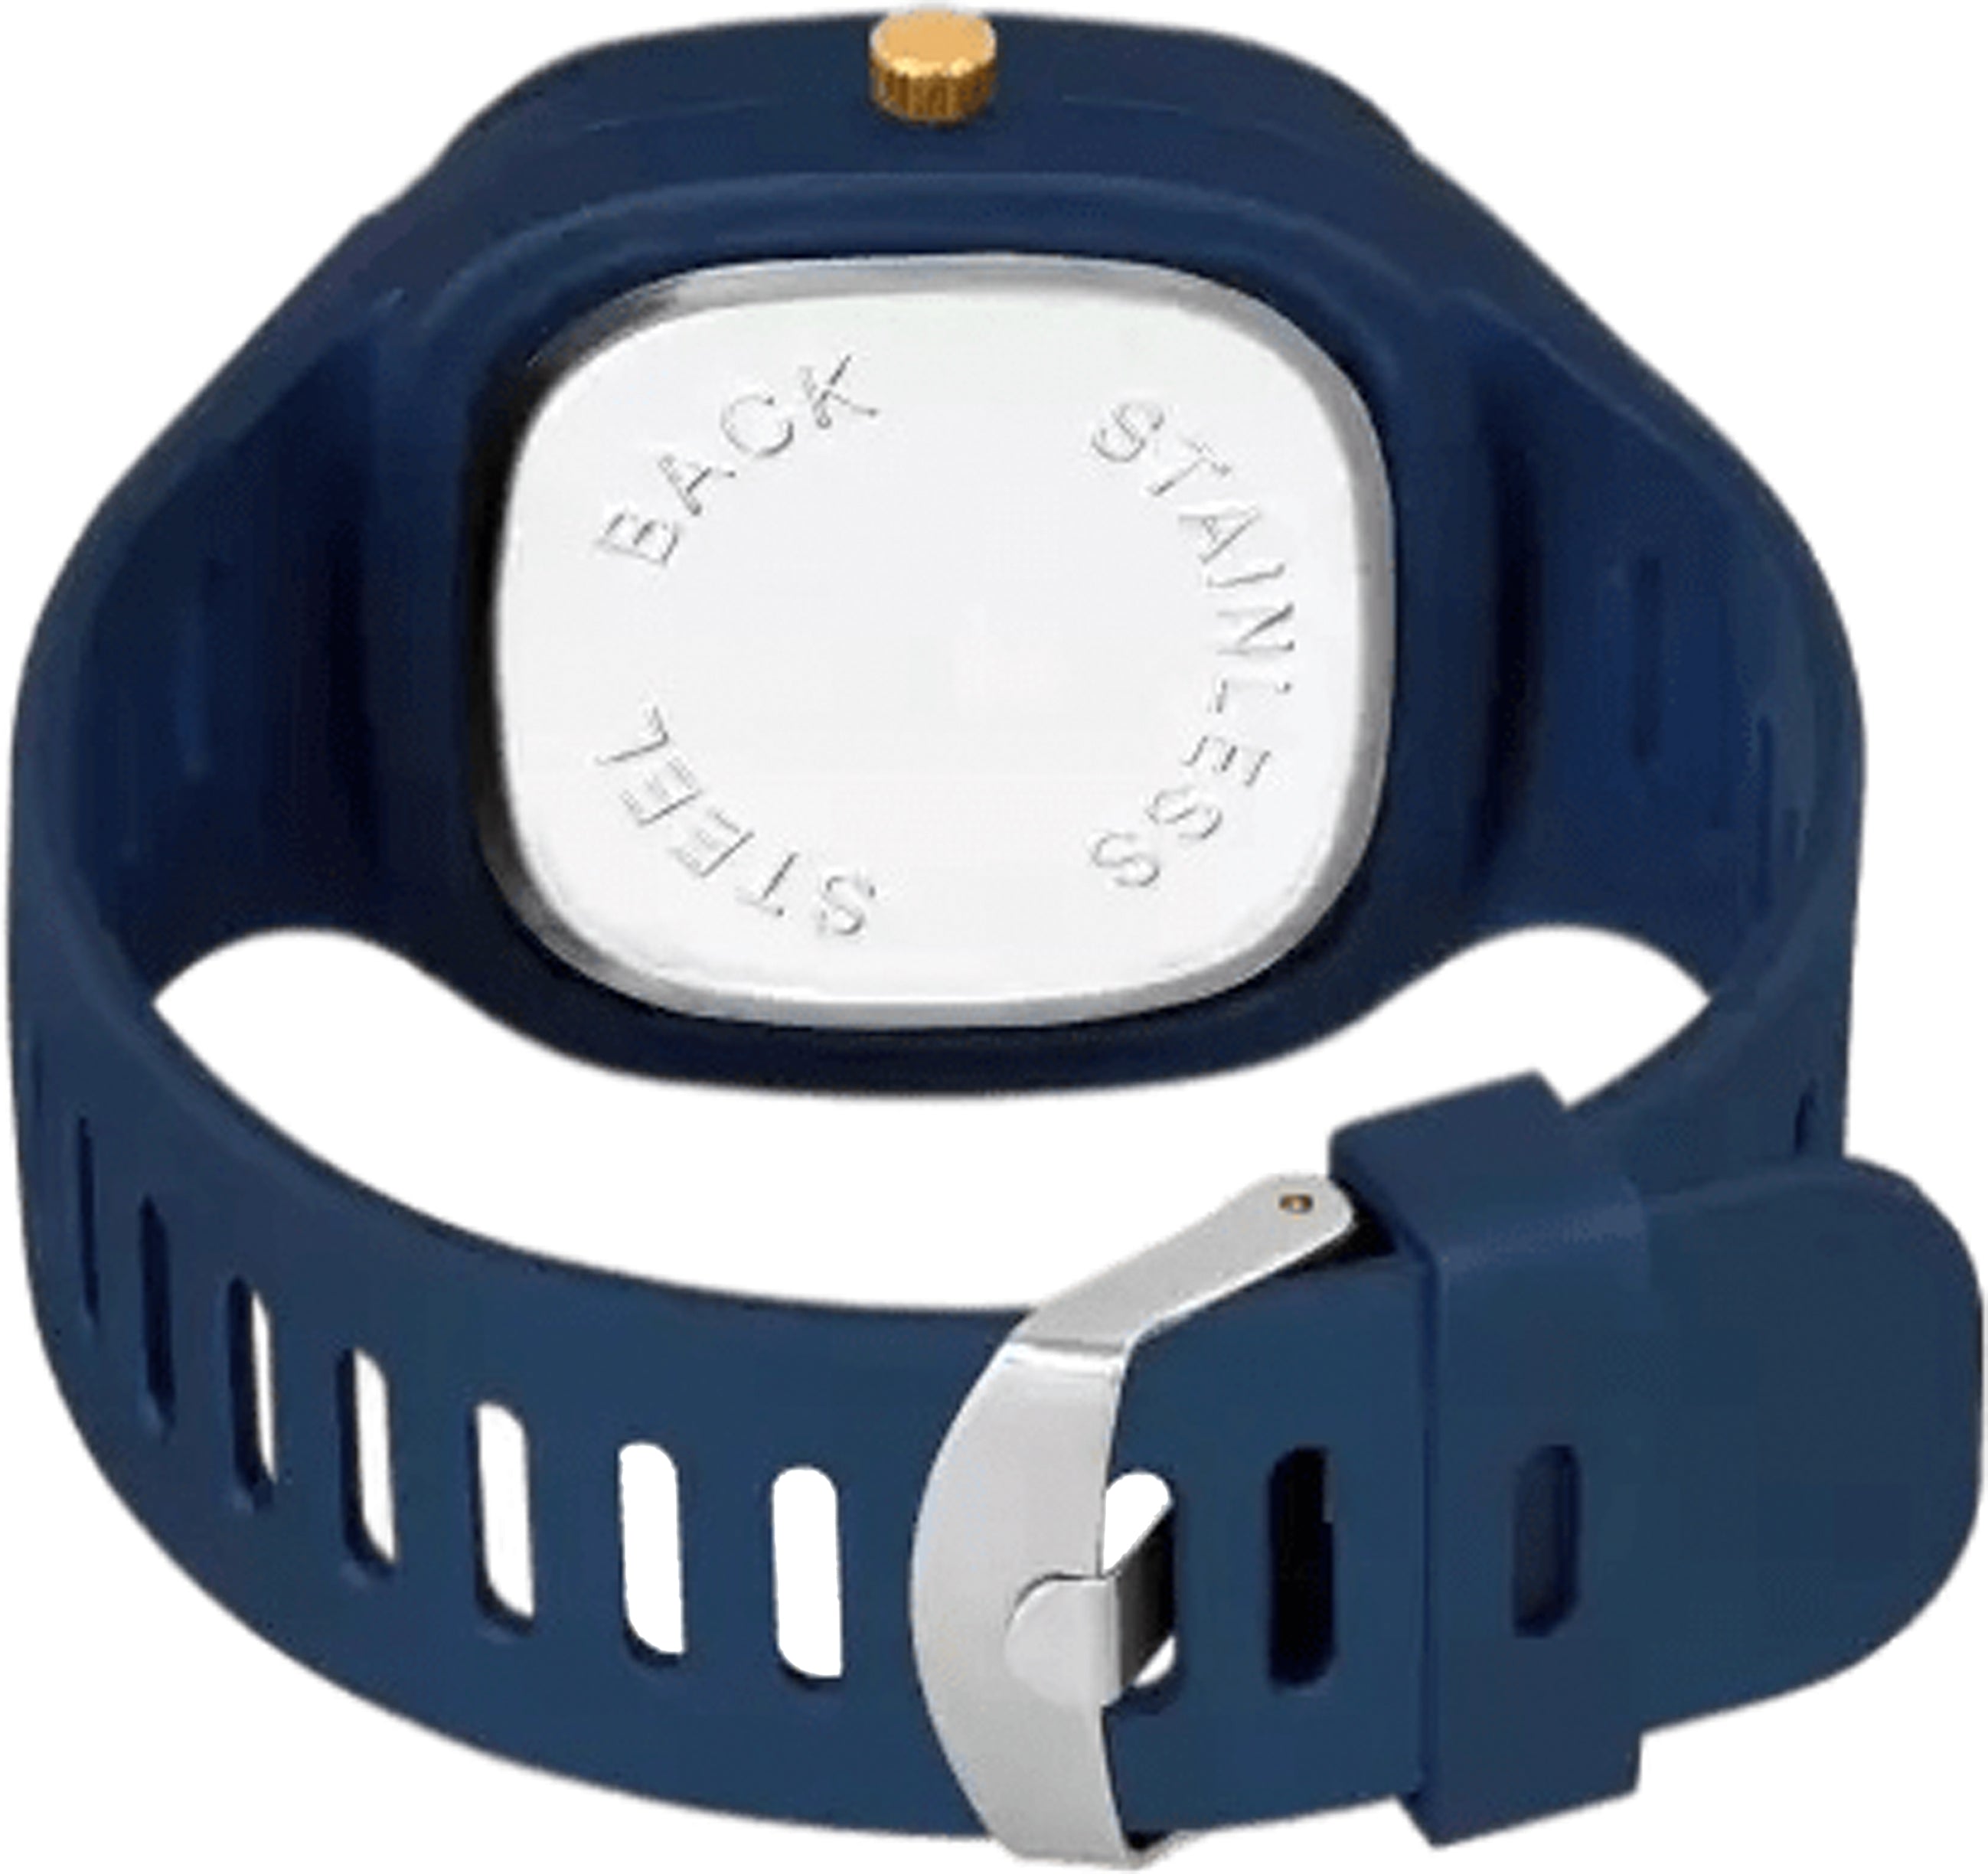 Blue Dial & Blue Silicone Strap for Boys Analog Watch - For Men LCS-4258